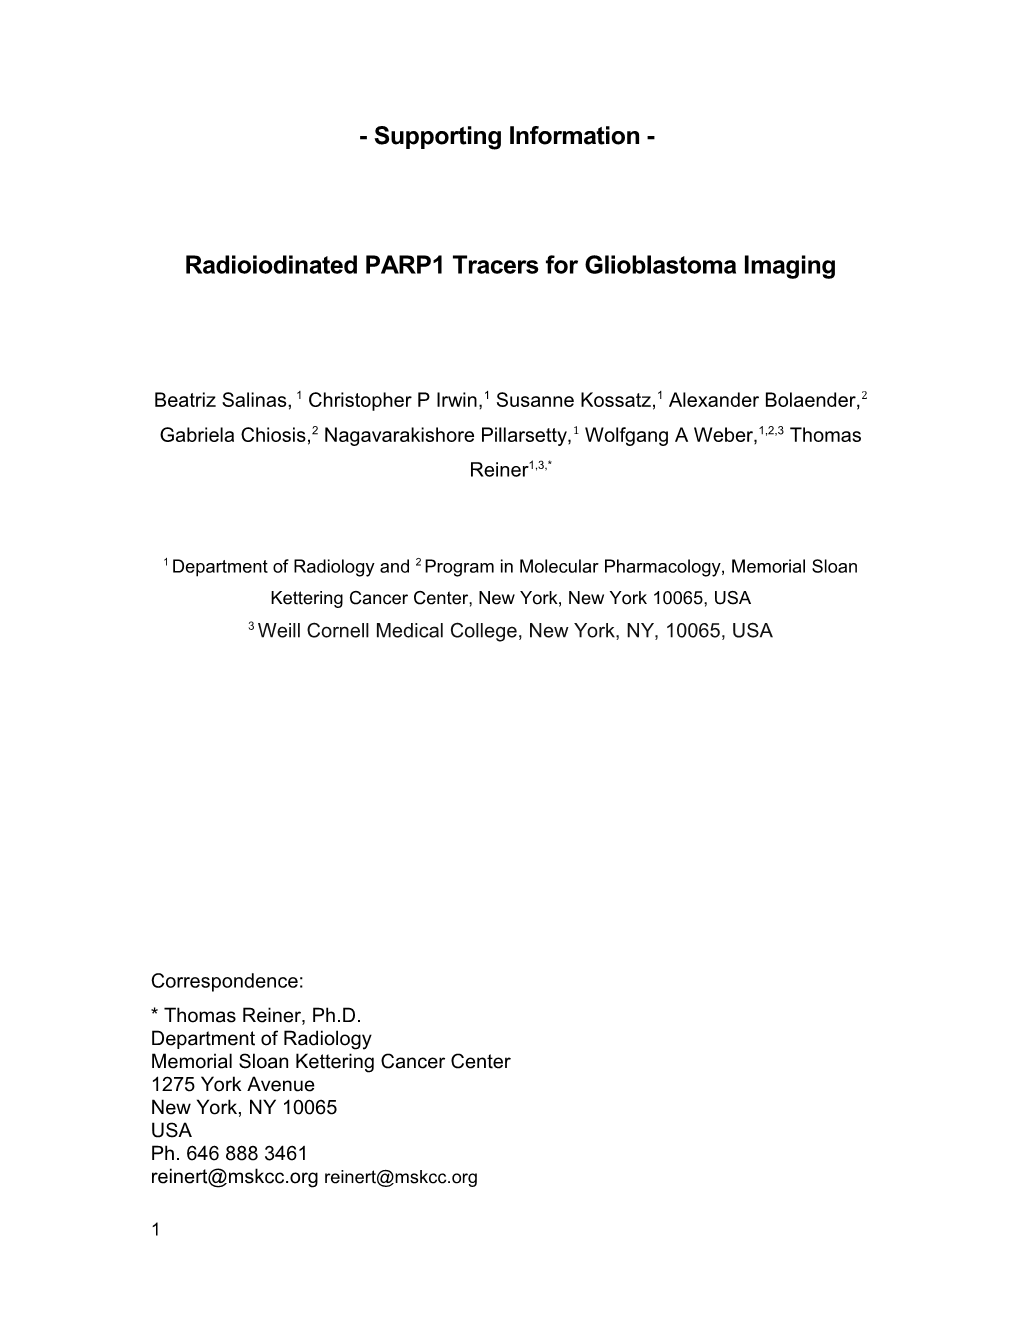 Radioiodinated PARP1 Tracers for Glioblastomaimaging